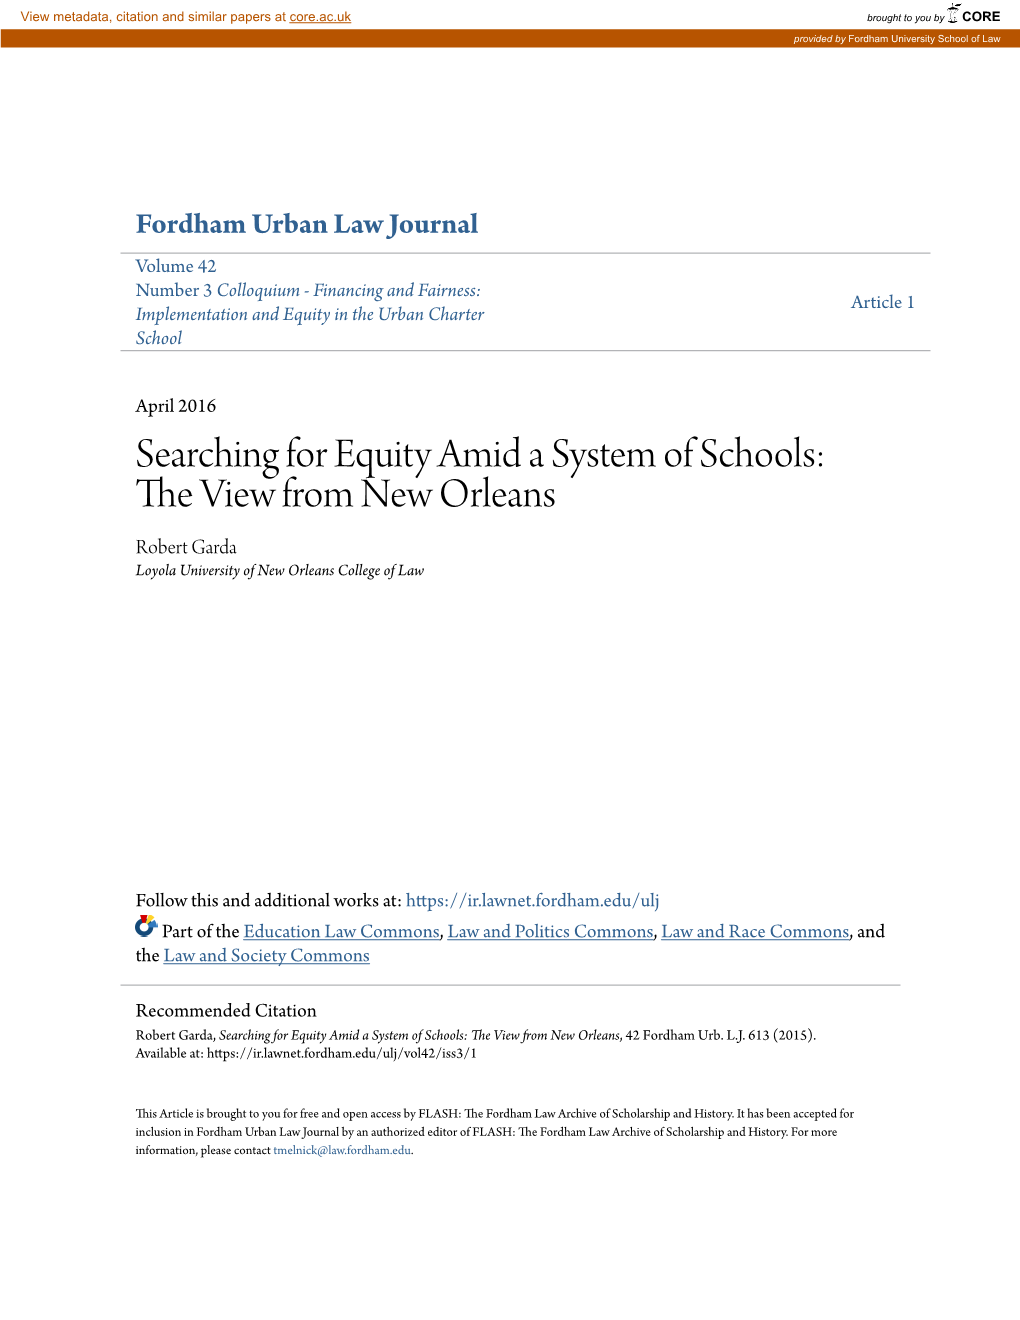 Searching for Equity Amid a System of Schools: the View from New Orleans, 42 Fordham Urb